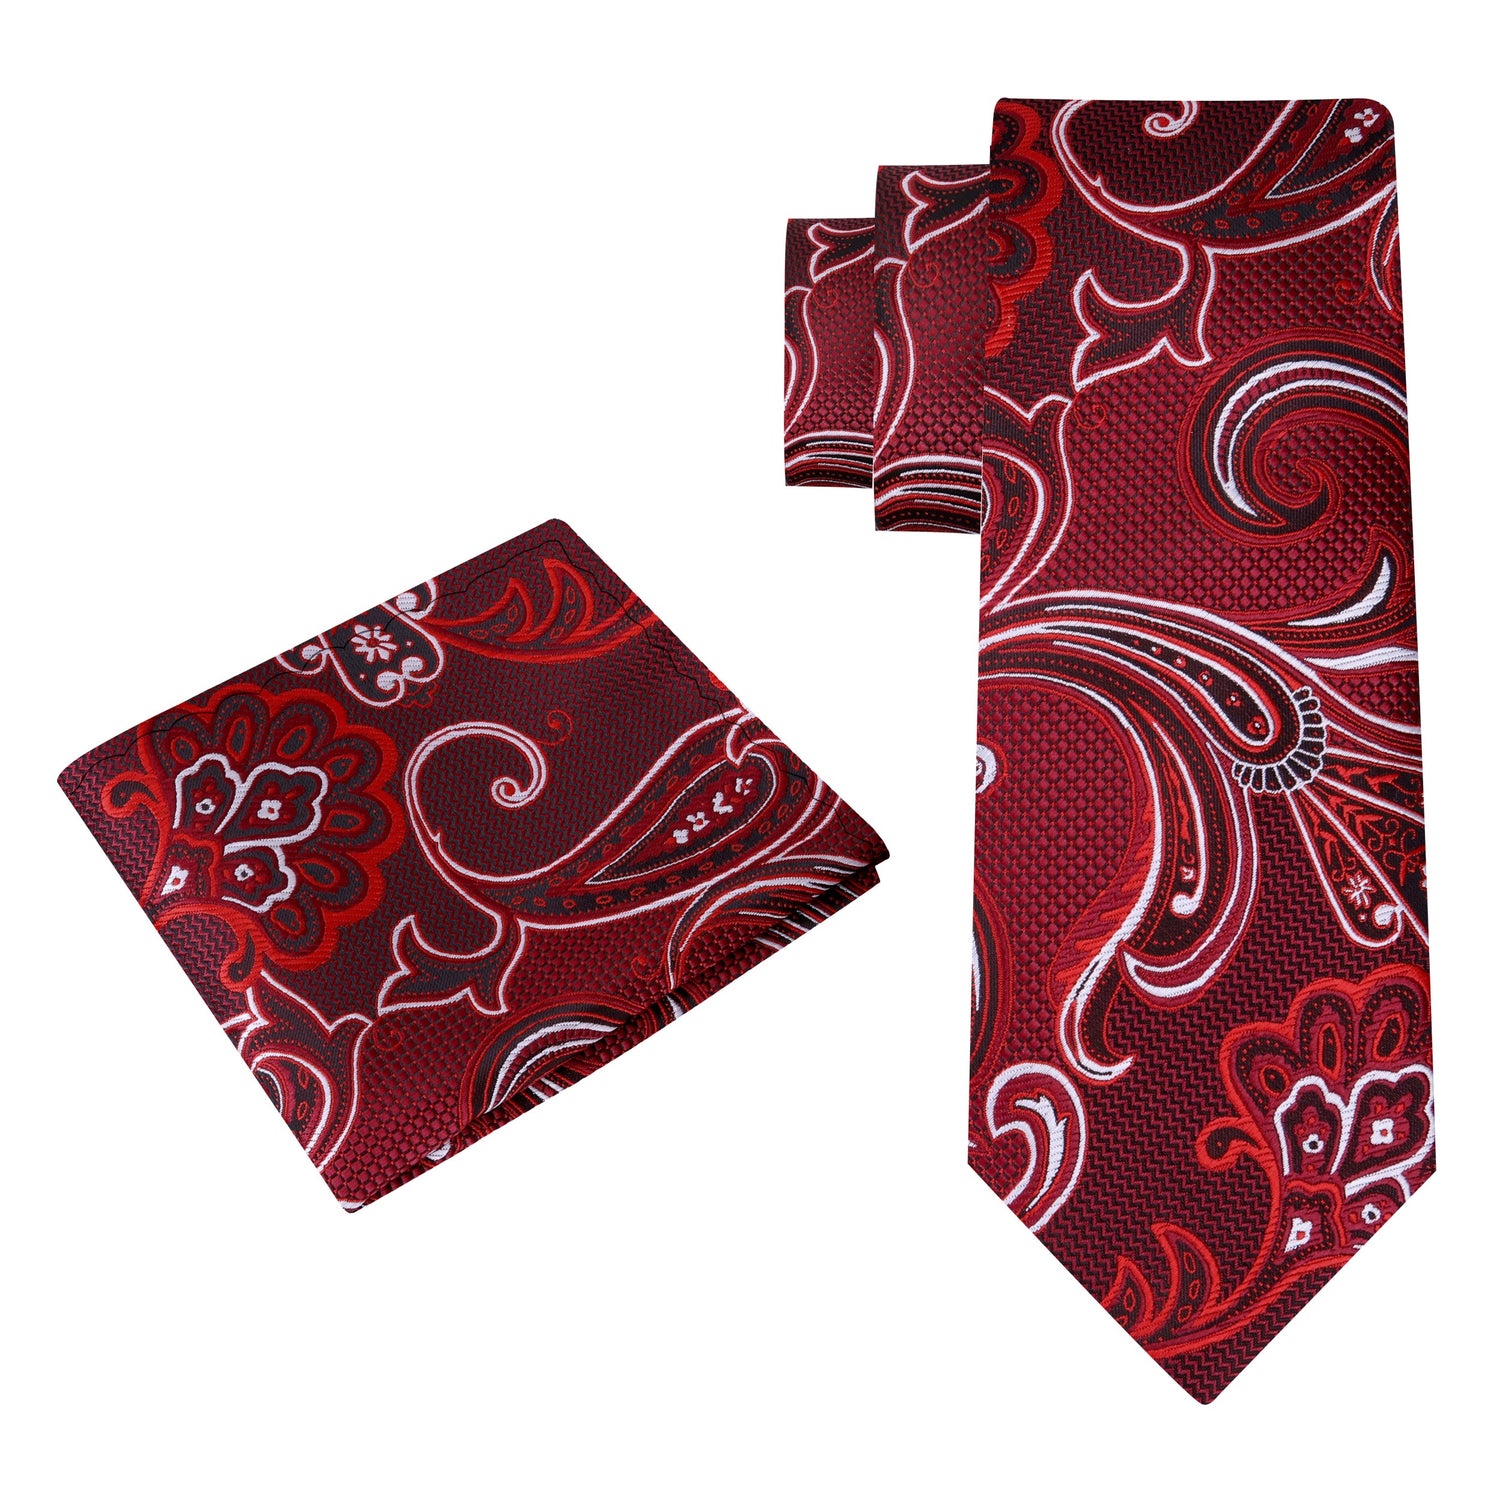 Alt View: A Red, White, Black Color Paisley Pattern Silk Necktie, Matching Pocket Square